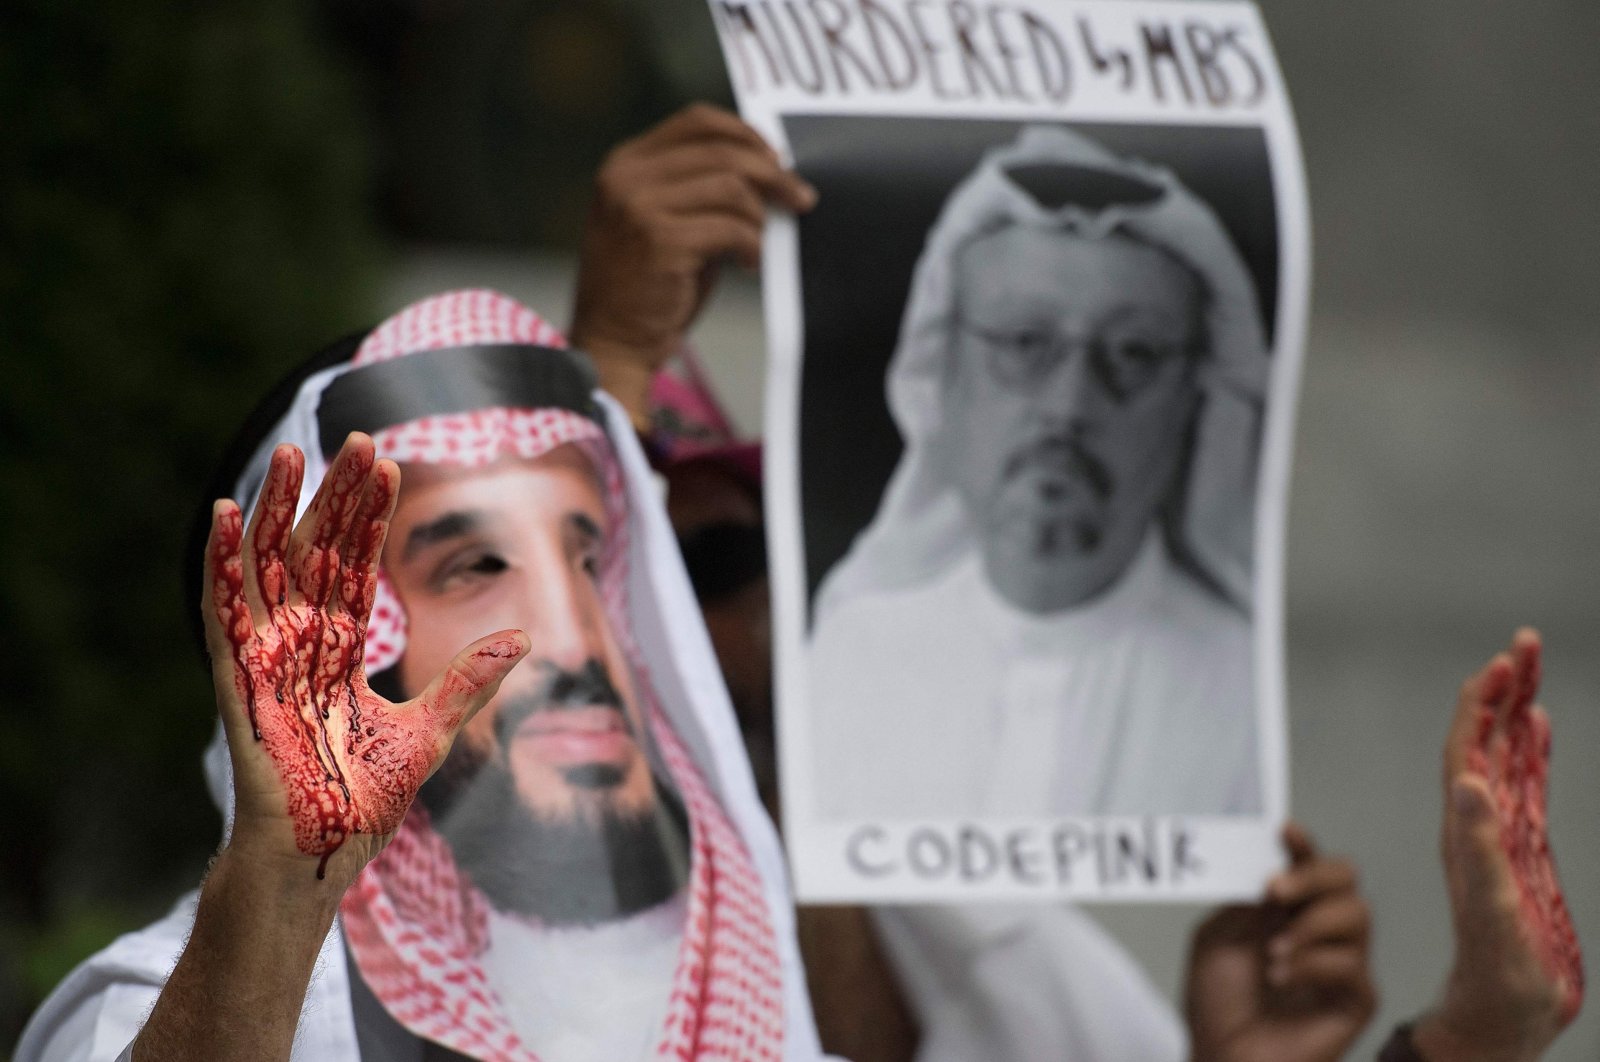 A demonstrator dressed as Saudi Arabian Crown Prince Mohammed bin Salman with blood on his hands protests outside the Saudi Embassy in Washington, D.C., U.S., Oct. 10, 2018. (AFP Photo)